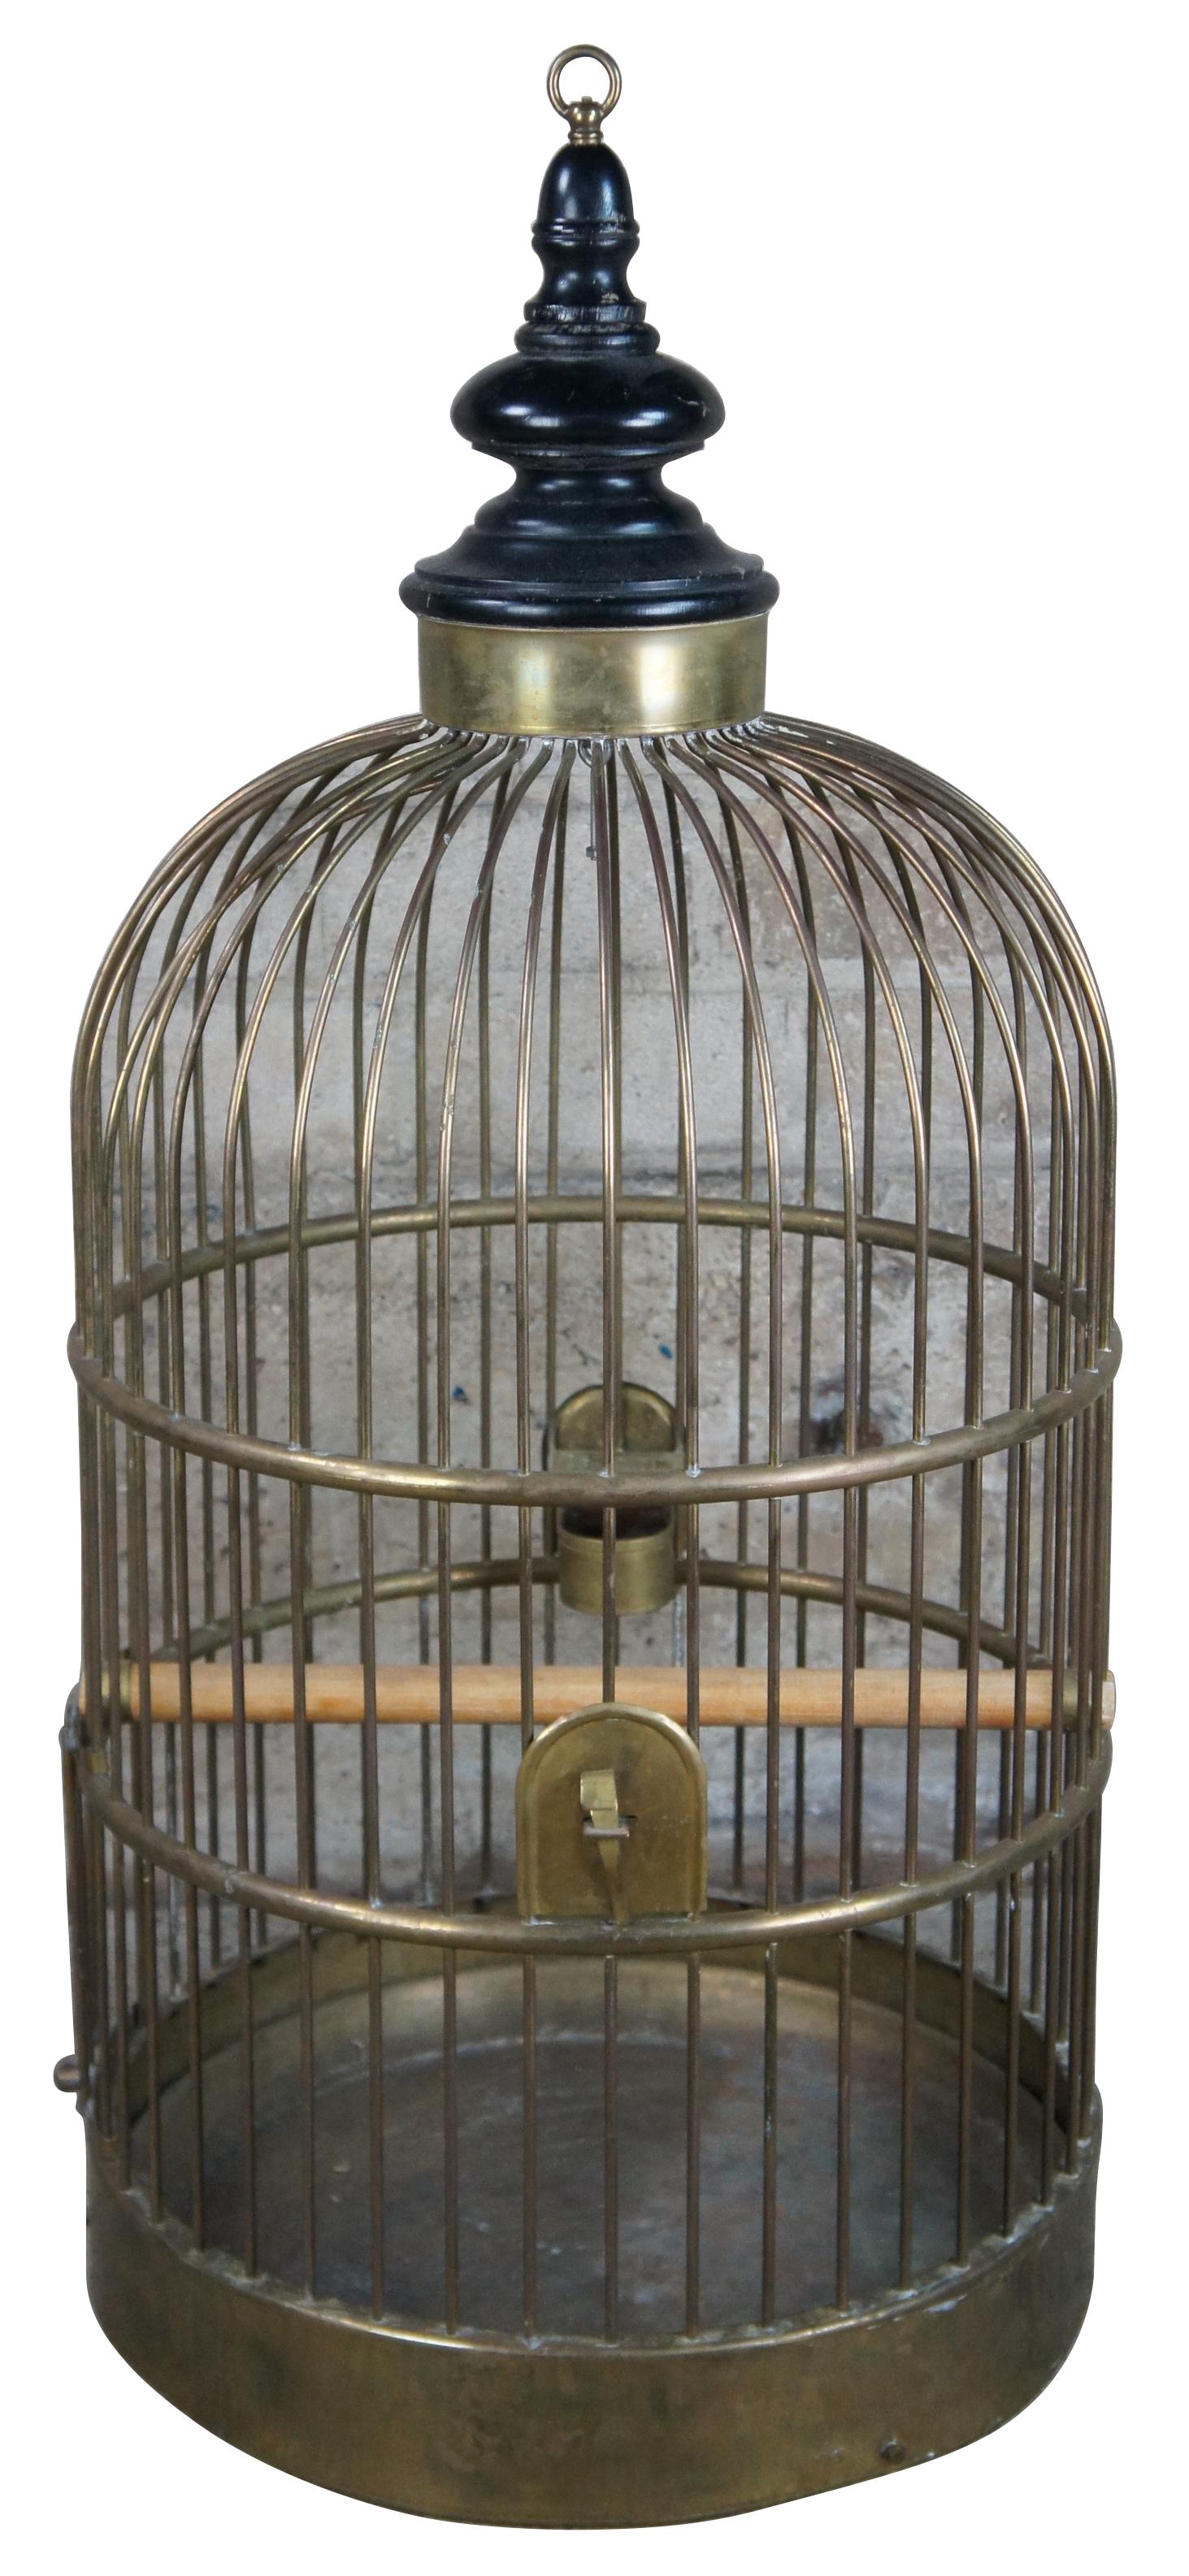 Monumental antique French bird cage featuring solid brass construction with turned wood finial, two brass feeders and perch. Measure: 39